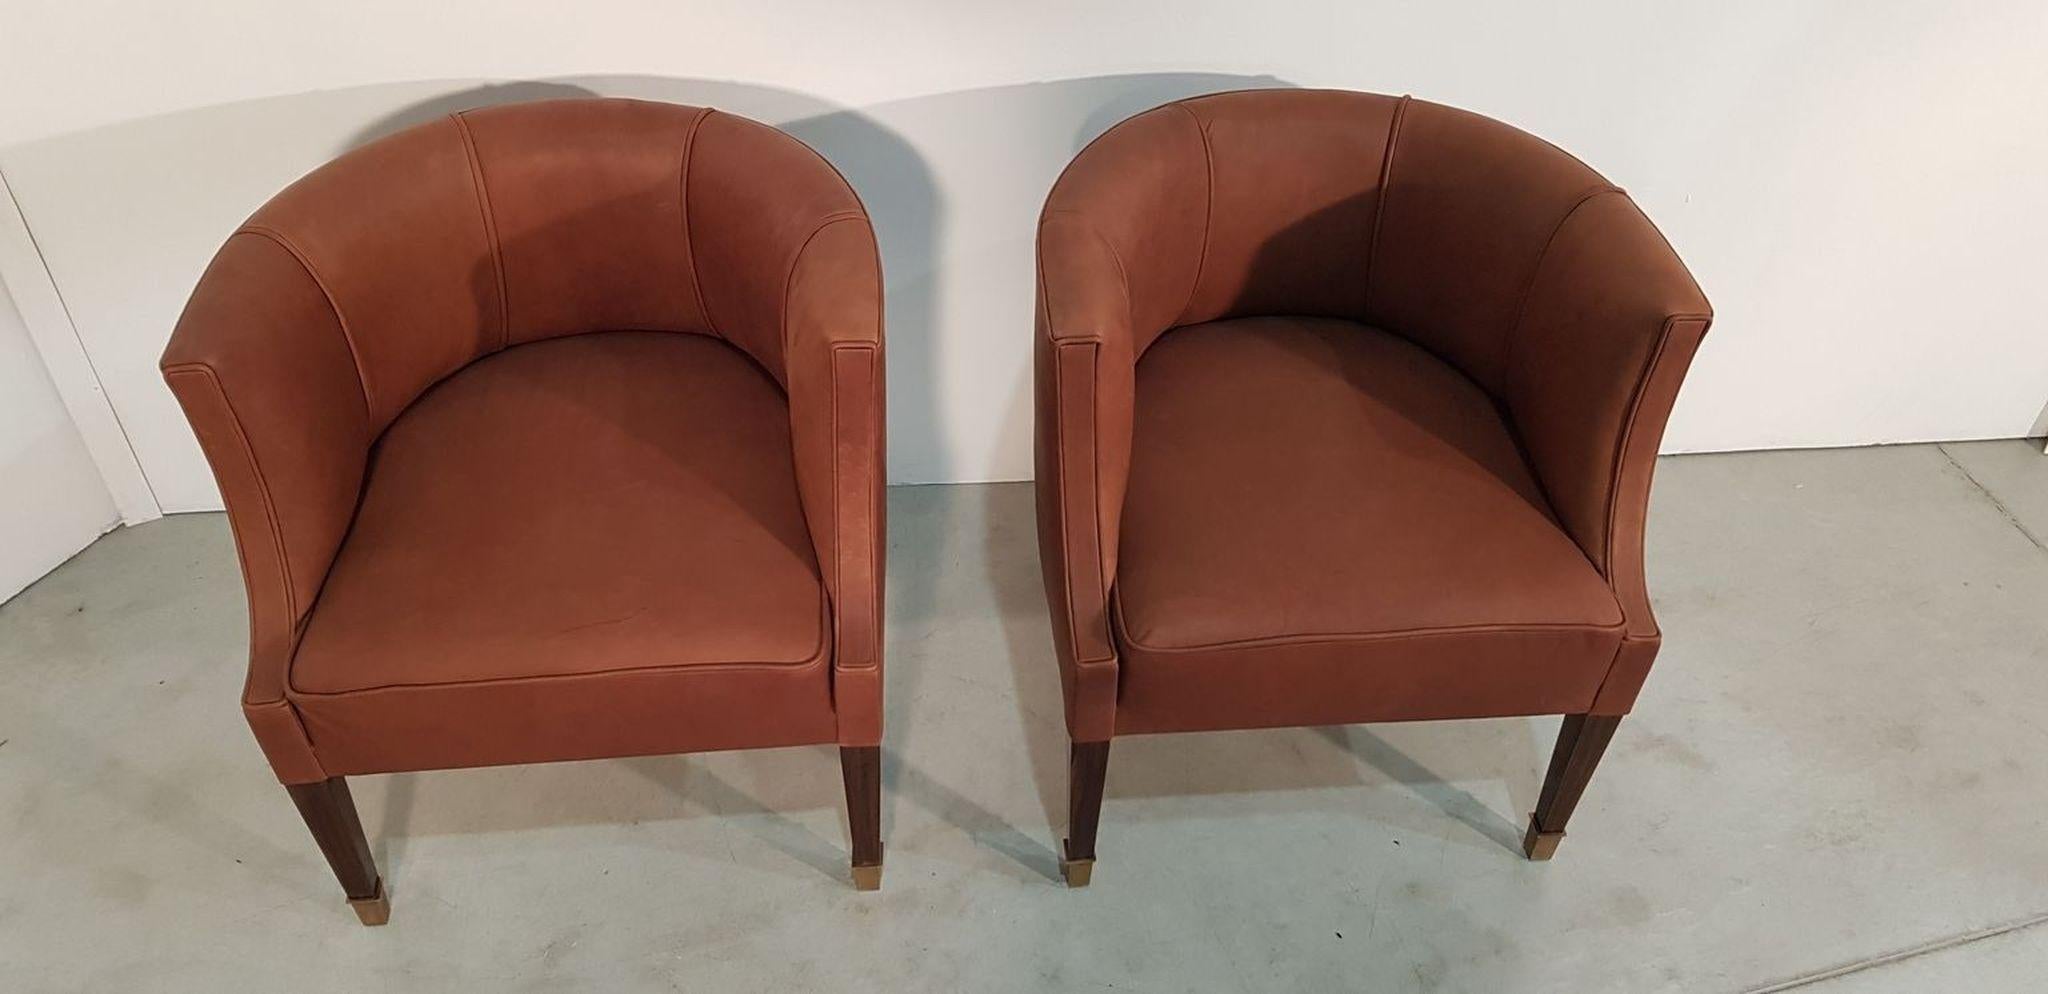 Pair of Art Deco Armchairs on Walnut Legs Covered Brown Leather, Hungary, 1930s im Zustand „Gut“ im Angebot in Budapest, Budapest